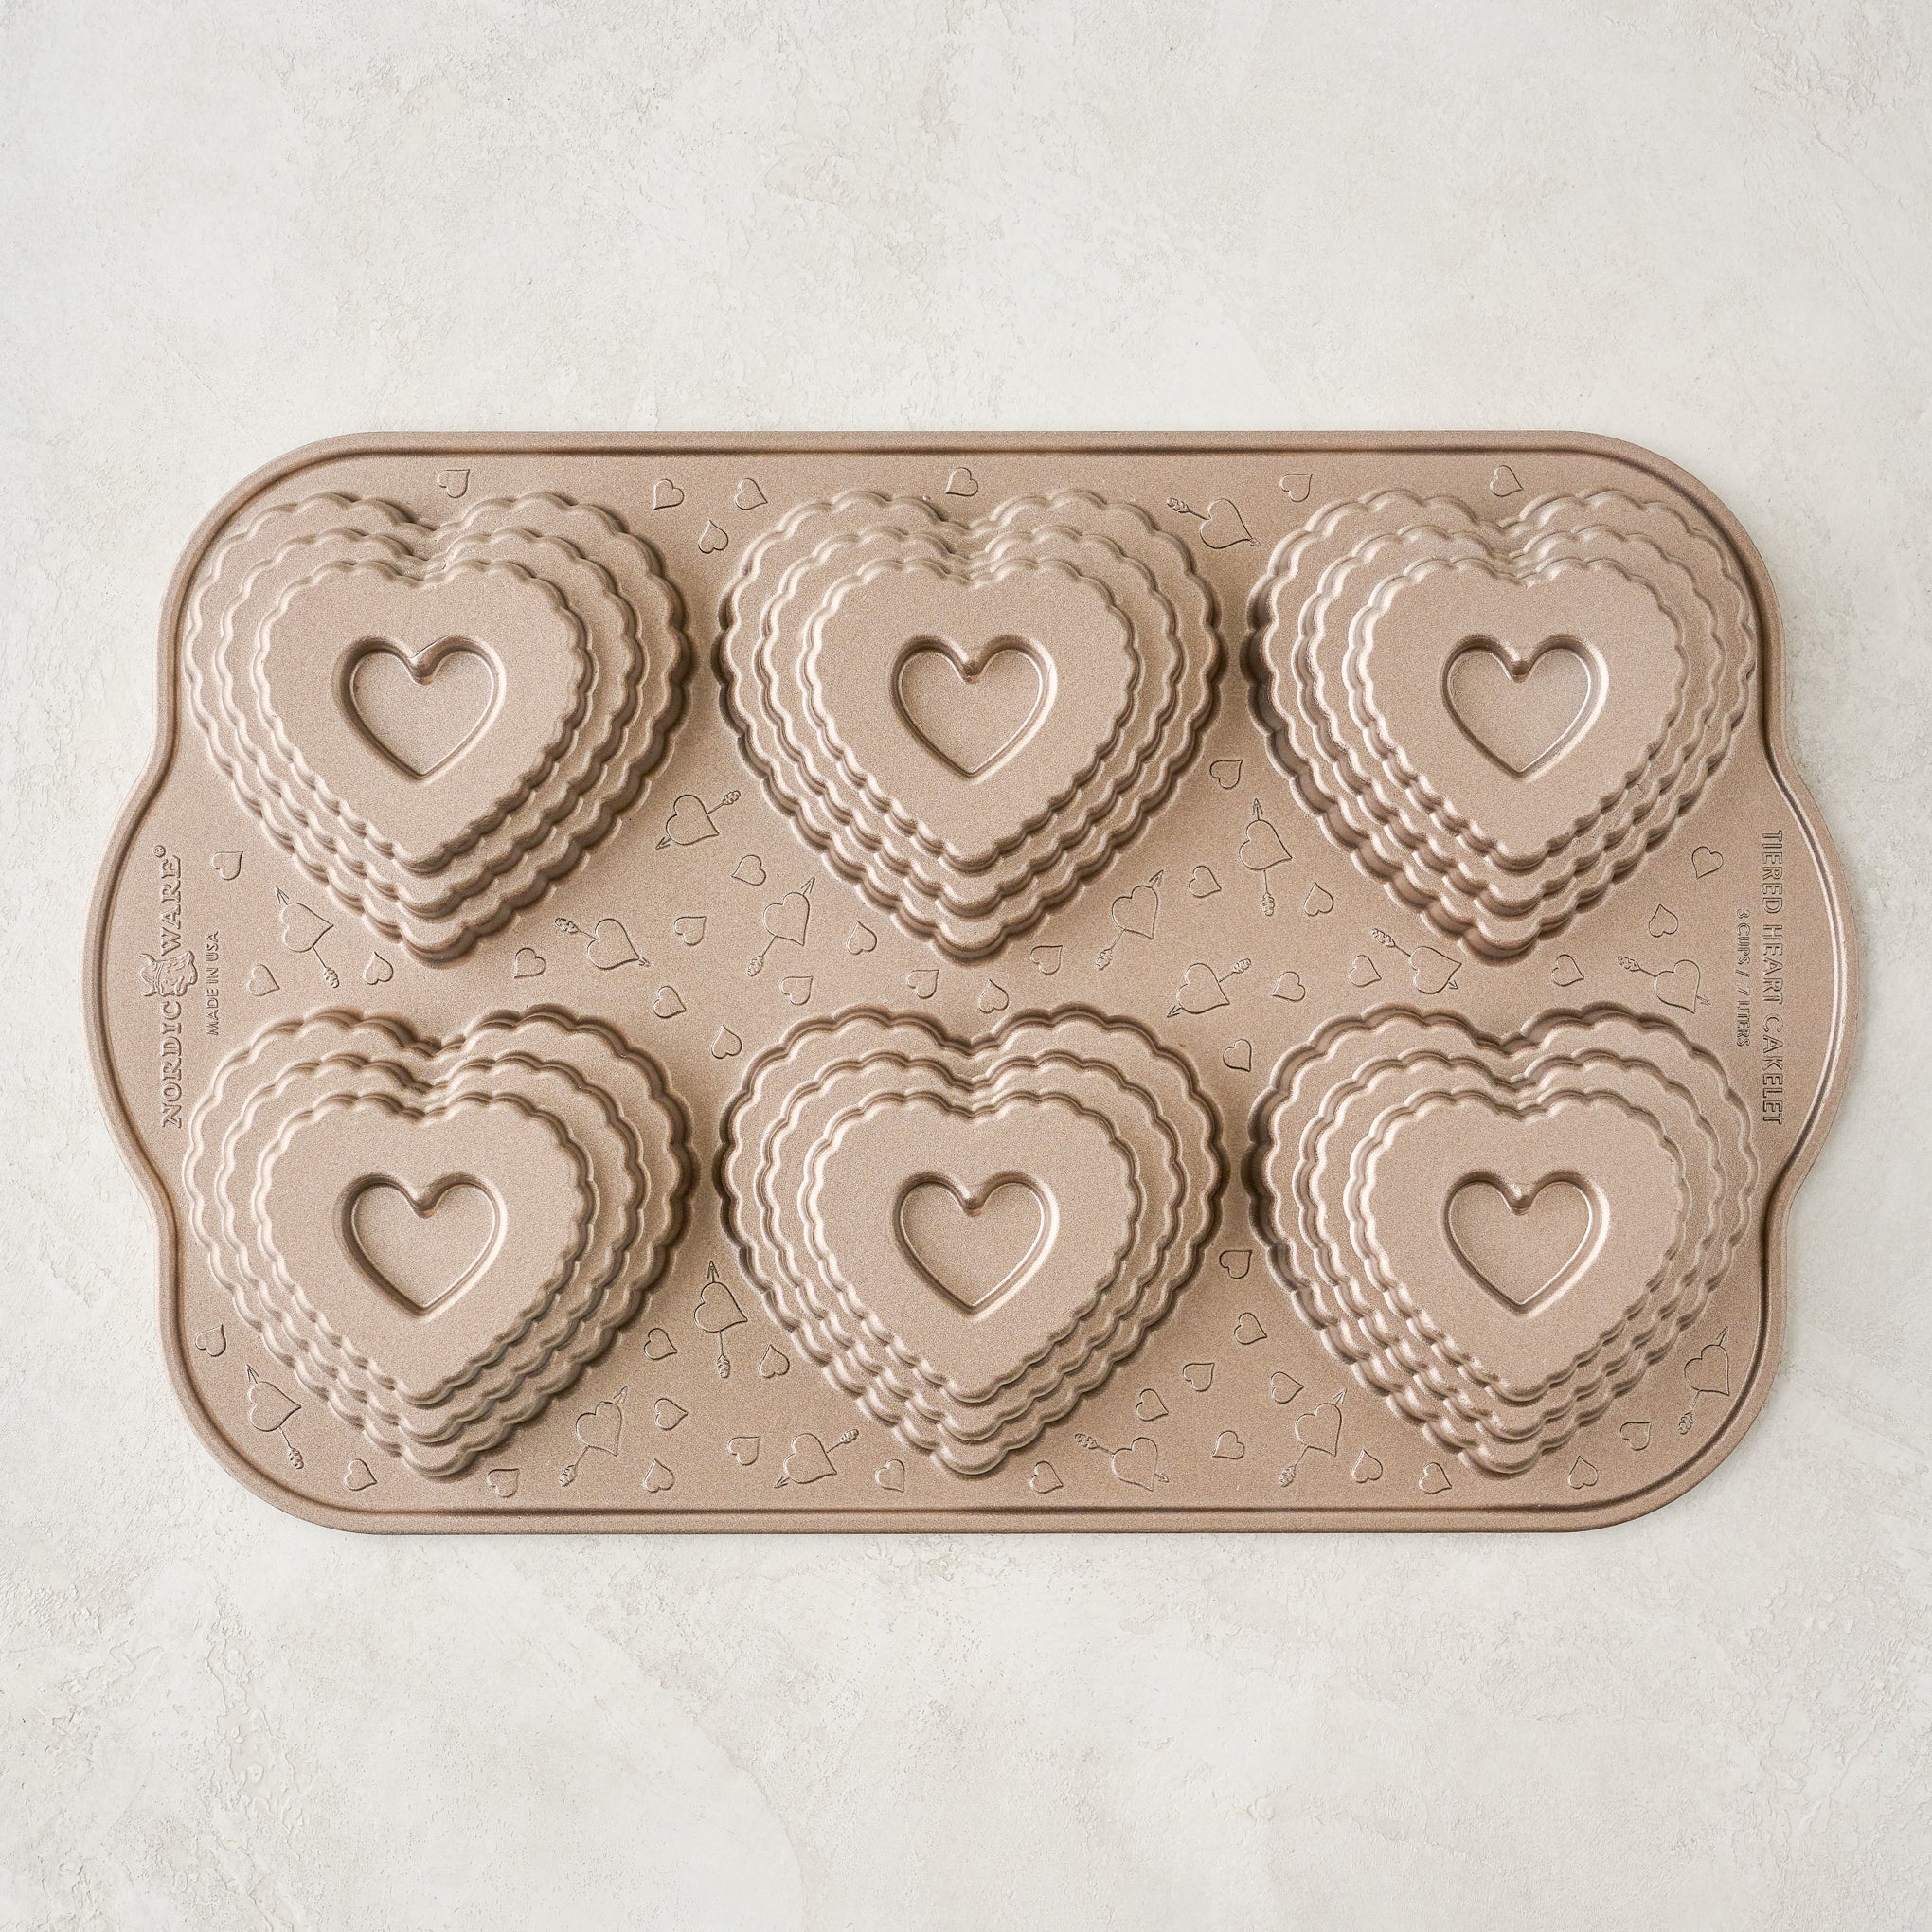 Tiered Heart Cakelet Pan On sale for $26.40, discounted from $44.00